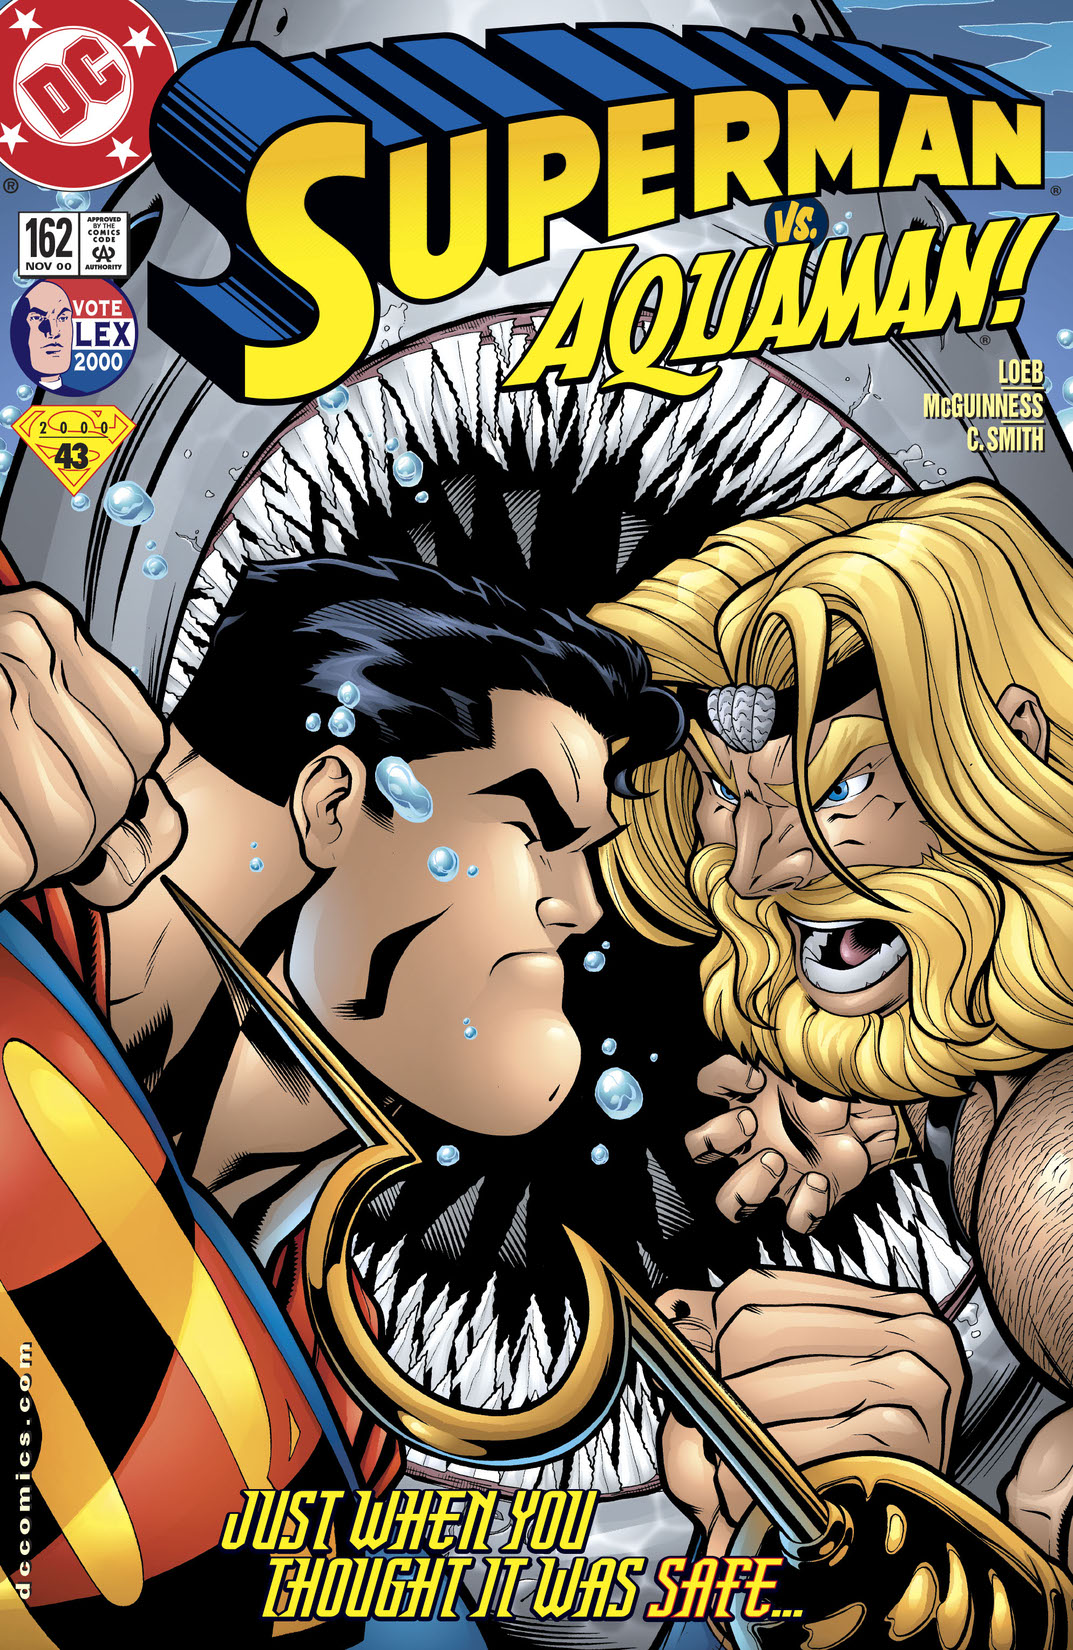 Superman (1986-2006) #162 preview images